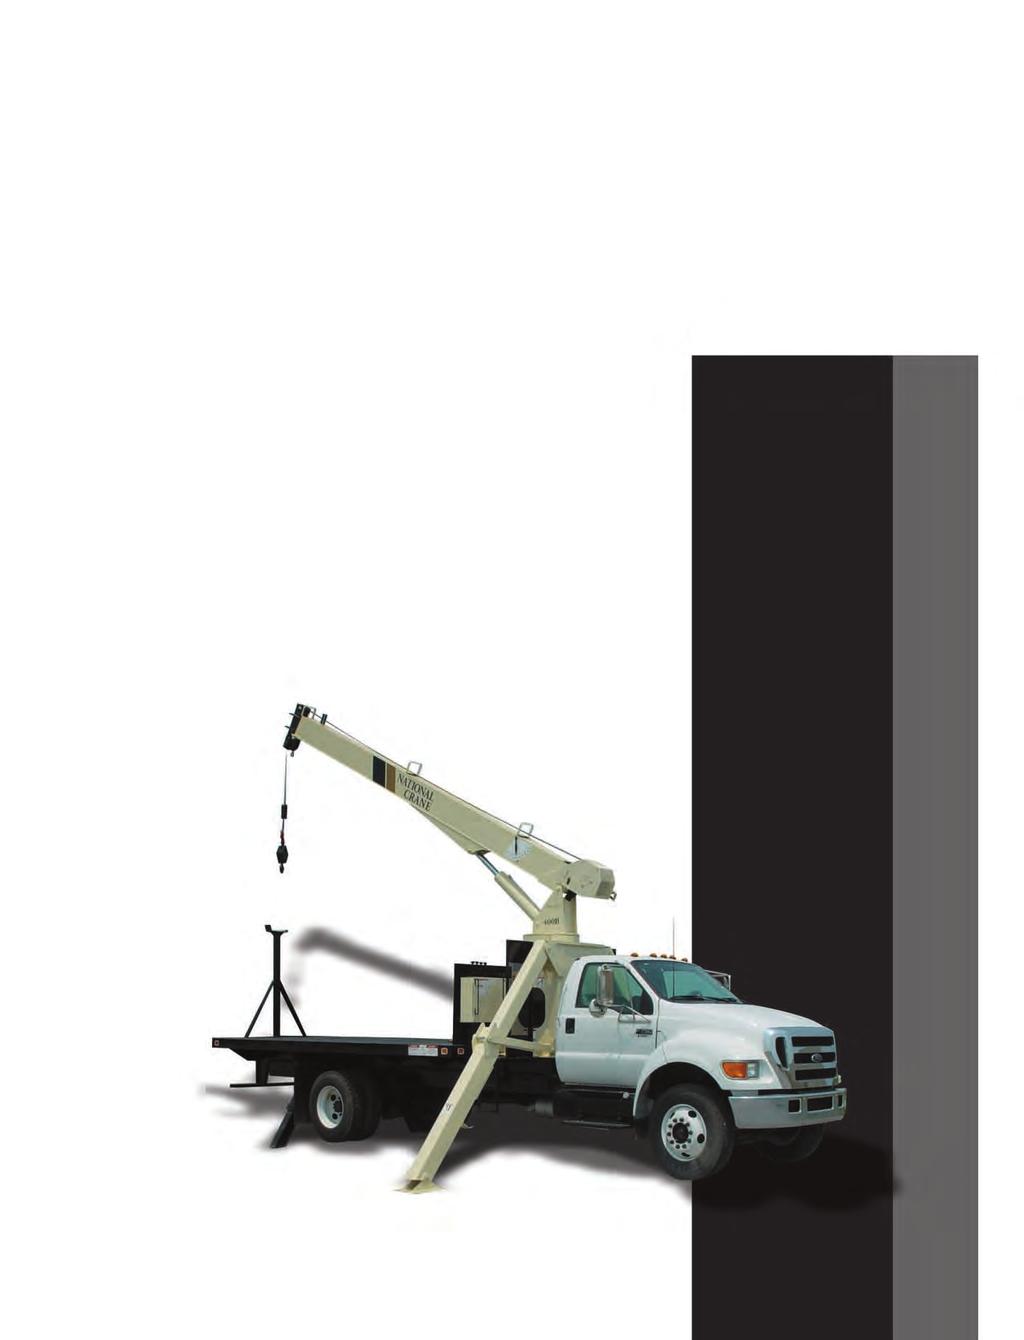 Series 4B product guide features 56' Three-section boom 1 Ton rating Internal anti-two-block Self-lubricating Easy Glide wear pads contents Features 2